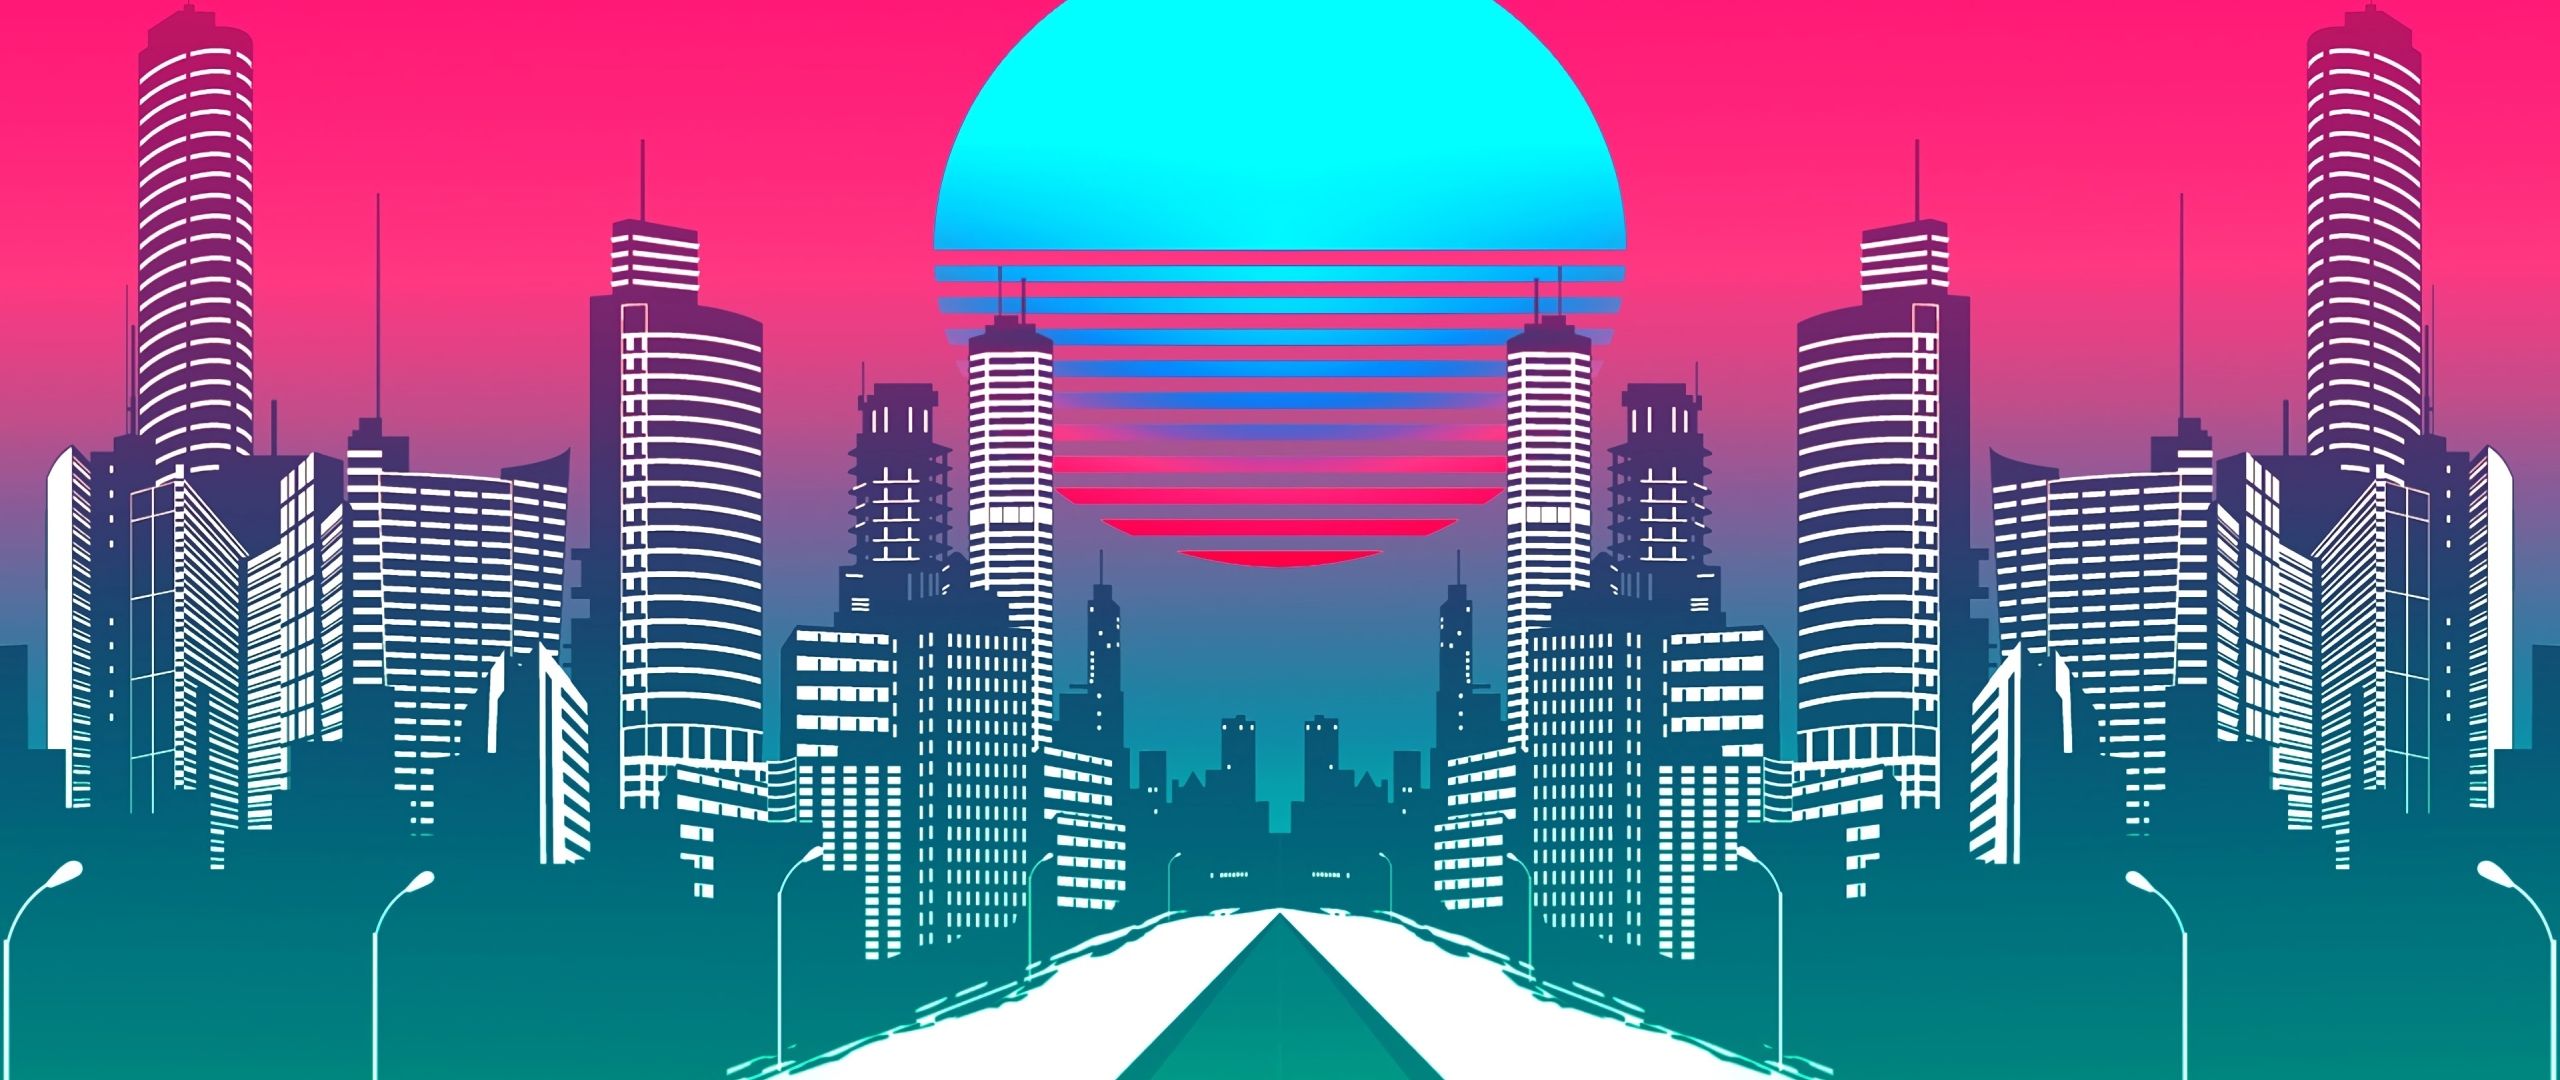 City Retrowave Synthwave Art 2560x1080 Resolution Wallpaper, HD Artist 4K Wallpaper, Image, Photo and Background